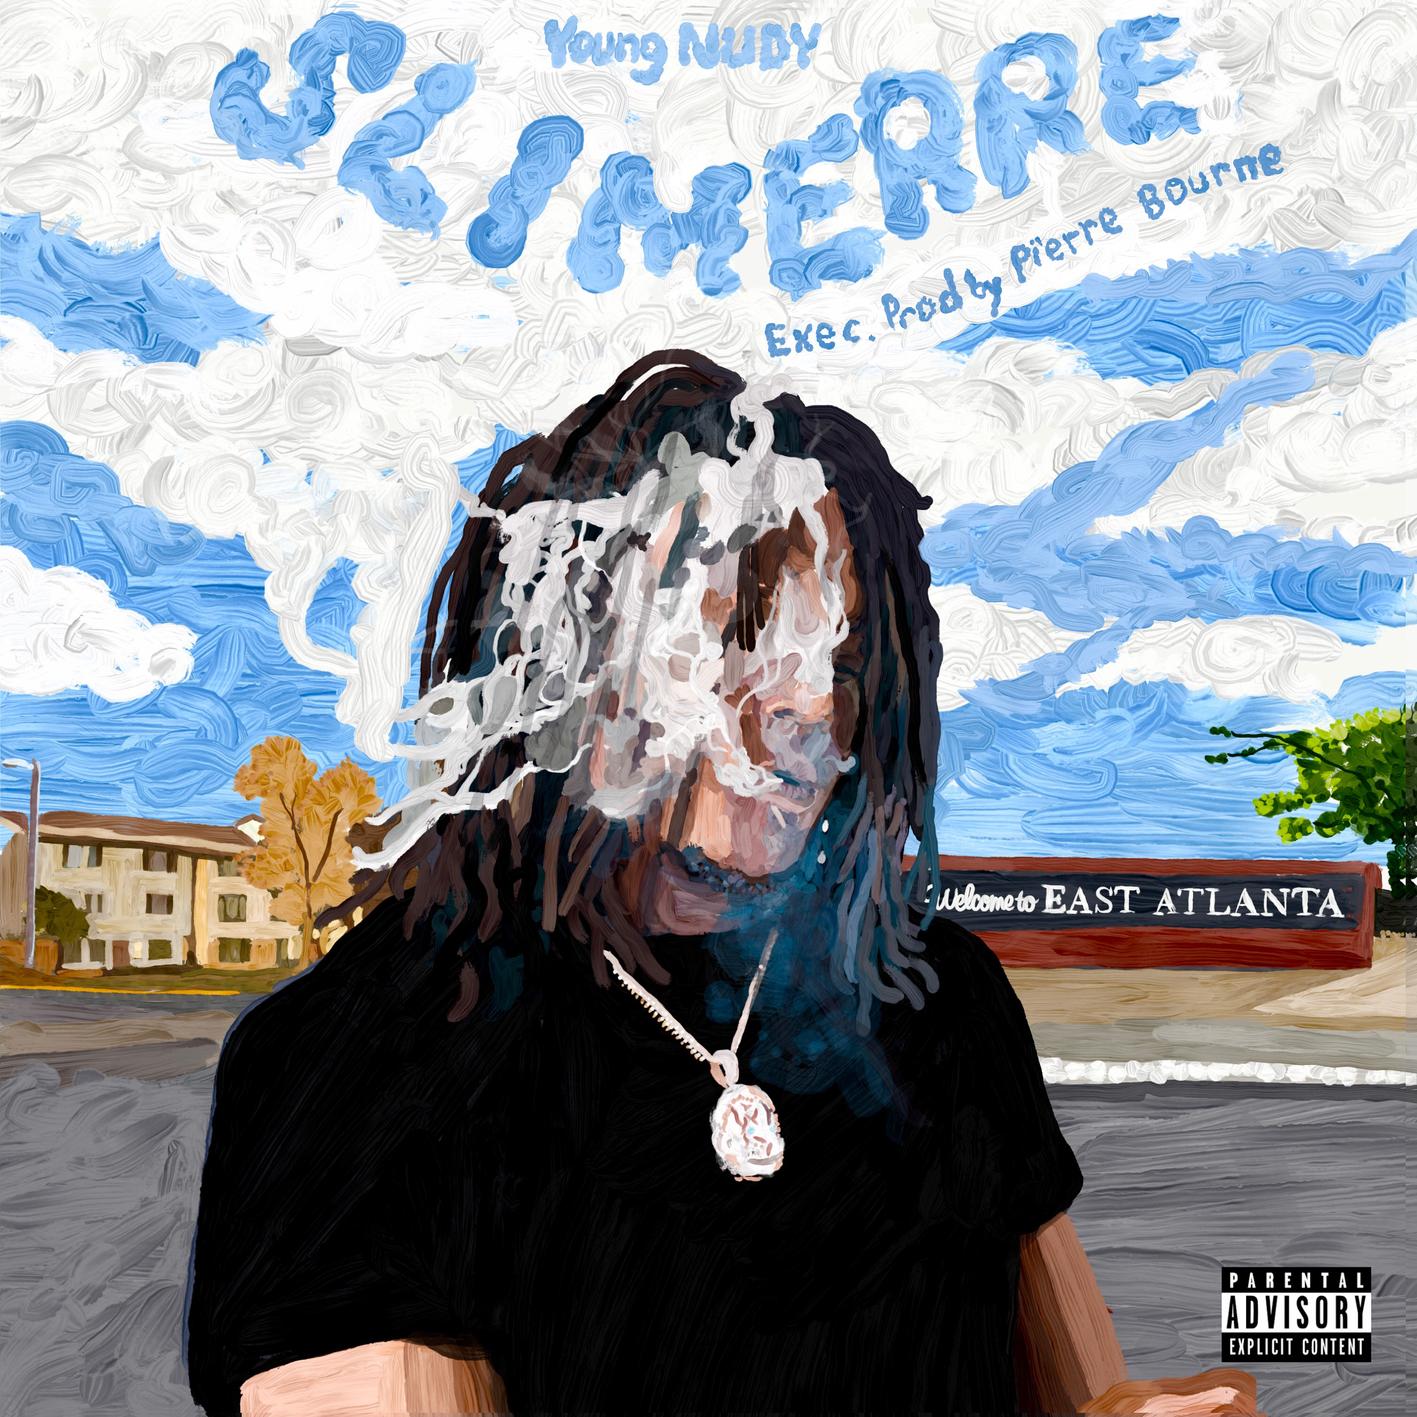 young nudy slimerre cover